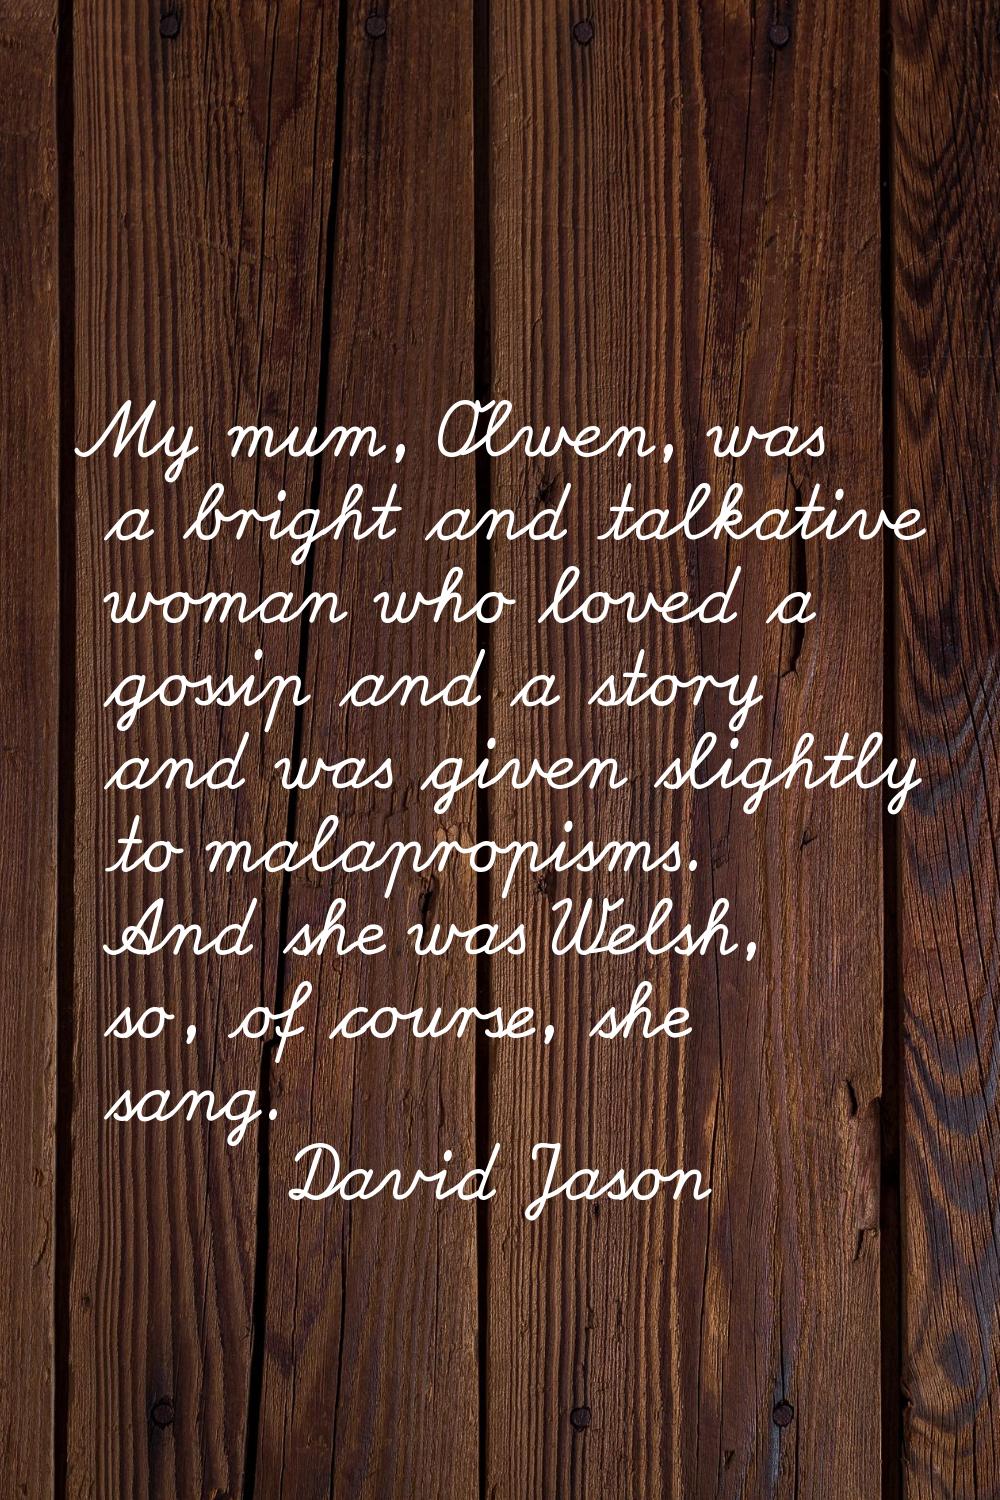 My mum, Olwen, was a bright and talkative woman who loved a gossip and a story and was given slight